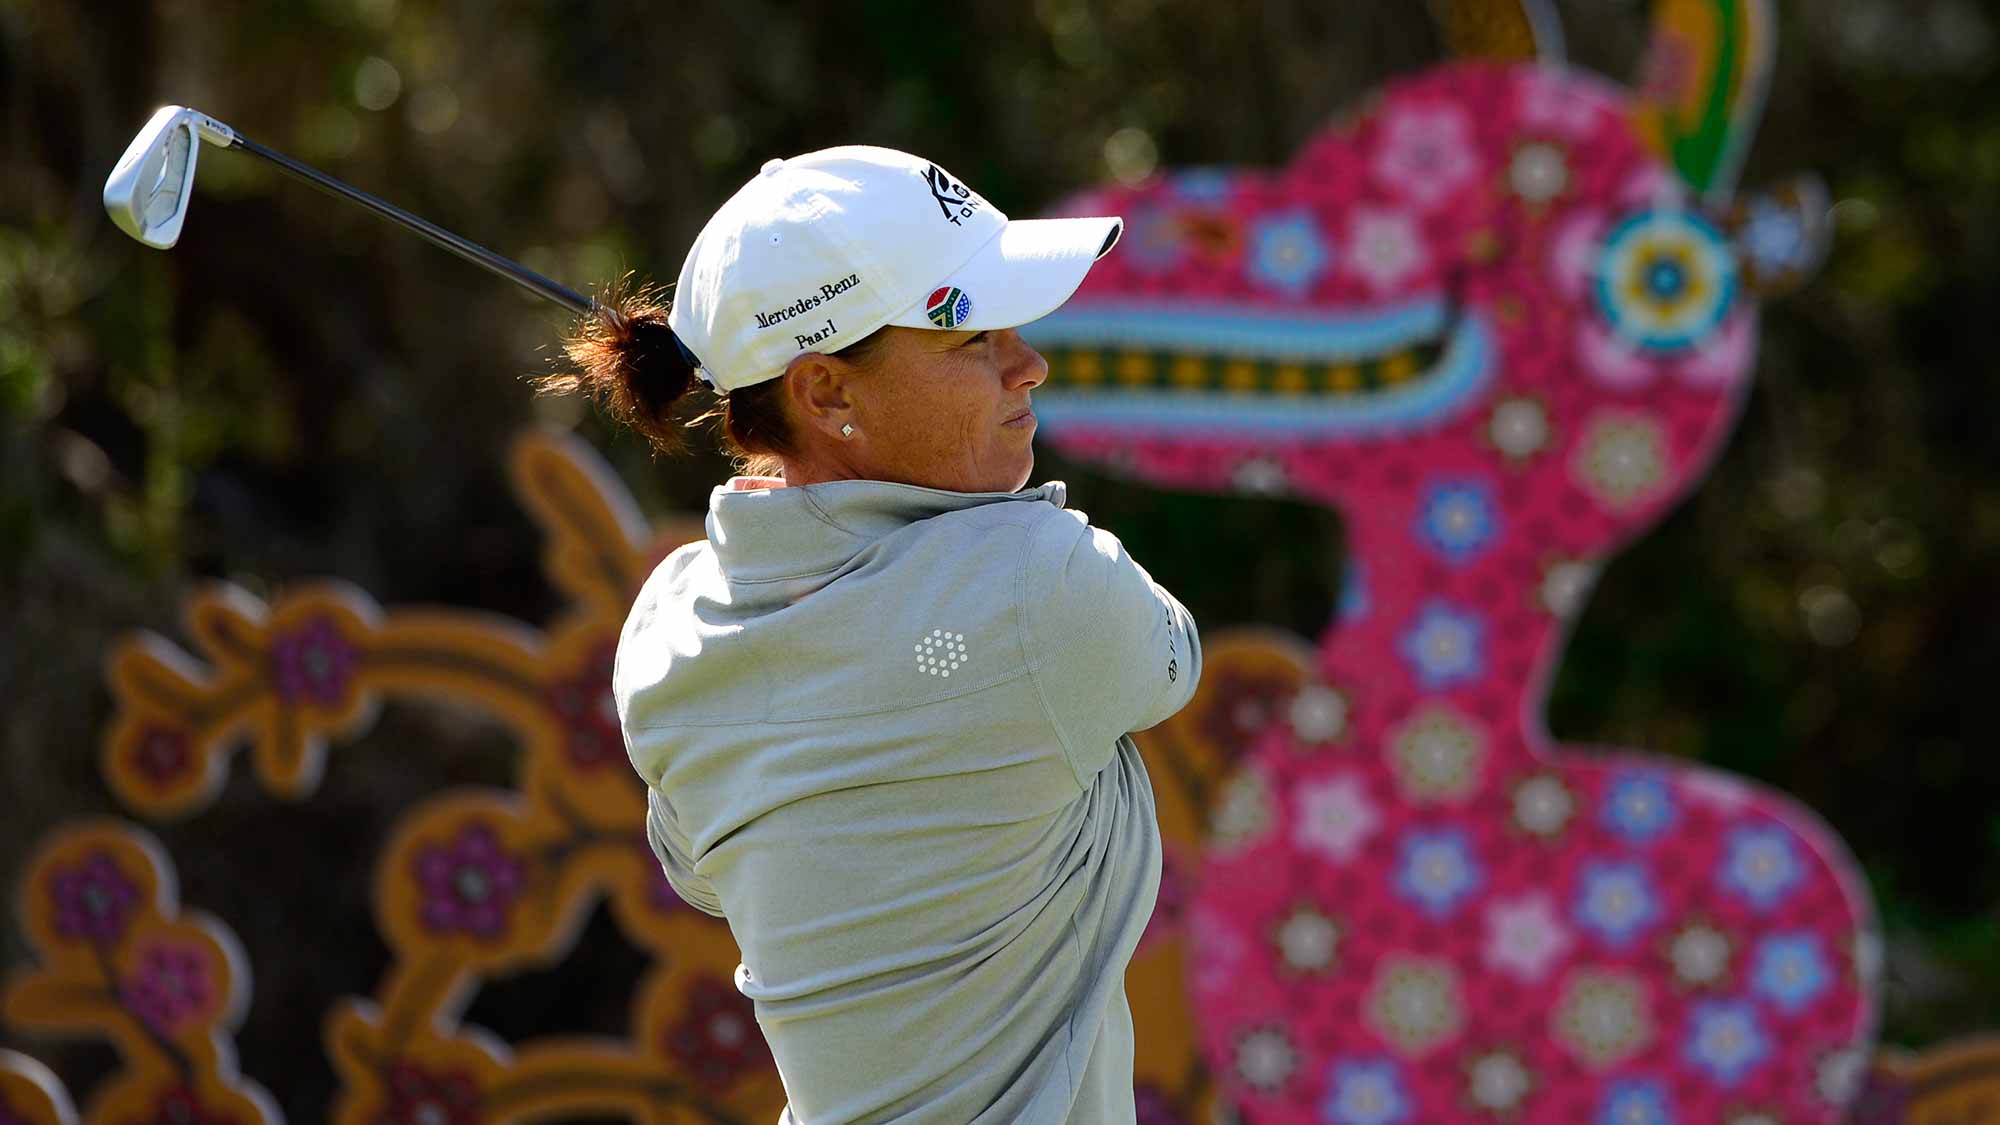 Lee-Ann Pace of South Africa makes a tee shot on the 13th hole during round three of the Swinging Skirts LPGA Classic presented by CTBC at the Lake Merced Golf Club